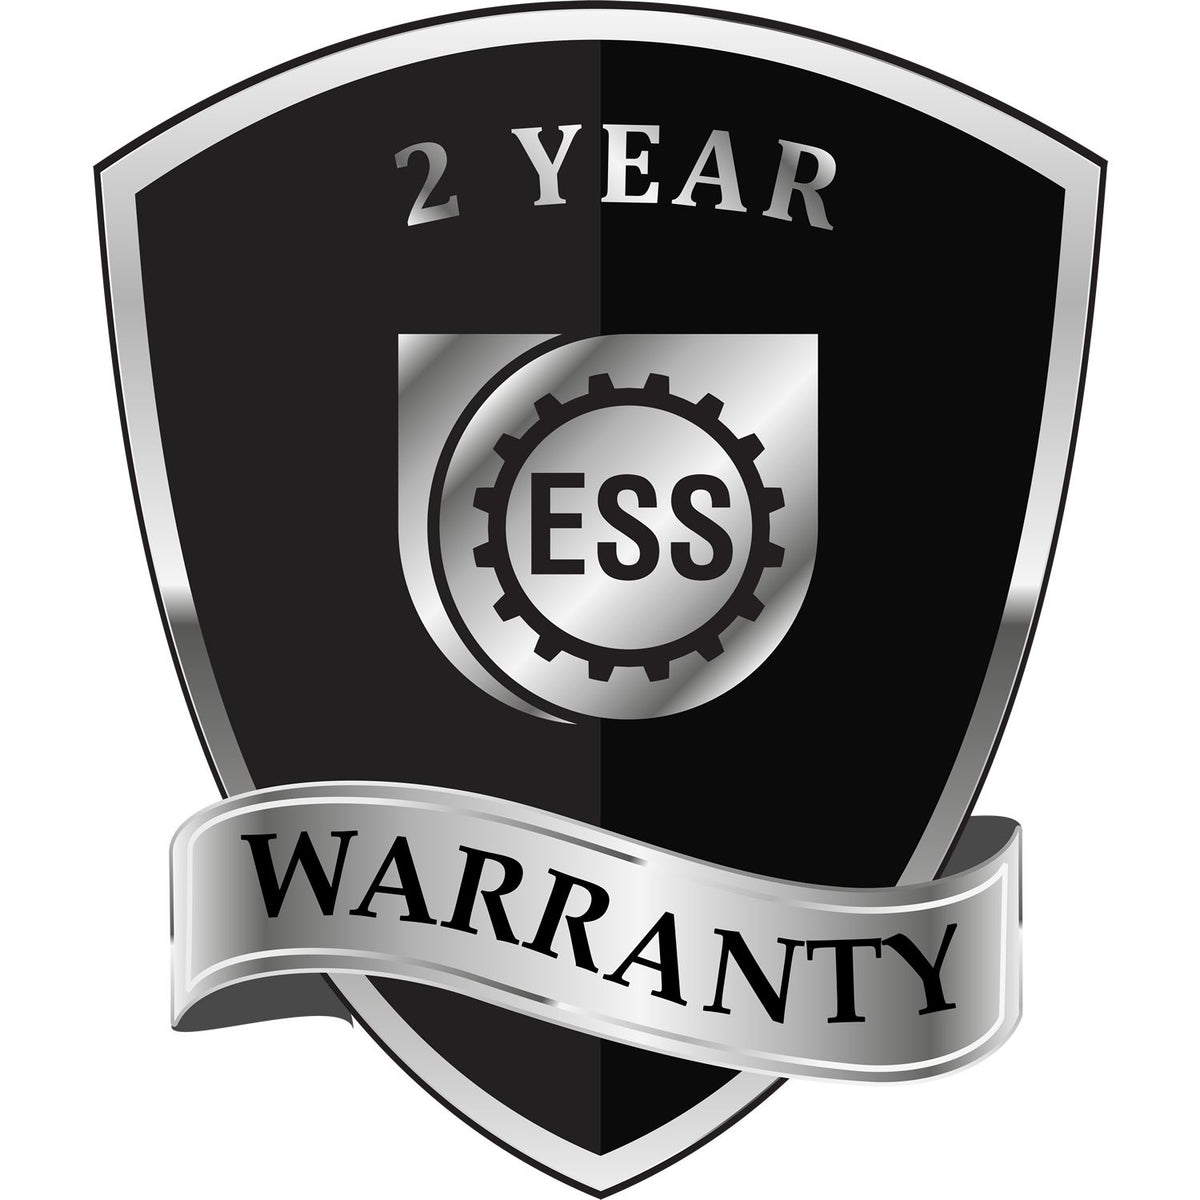 A black and silver badge or emblem showing warranty information for the Gift Florida Geologist Seal